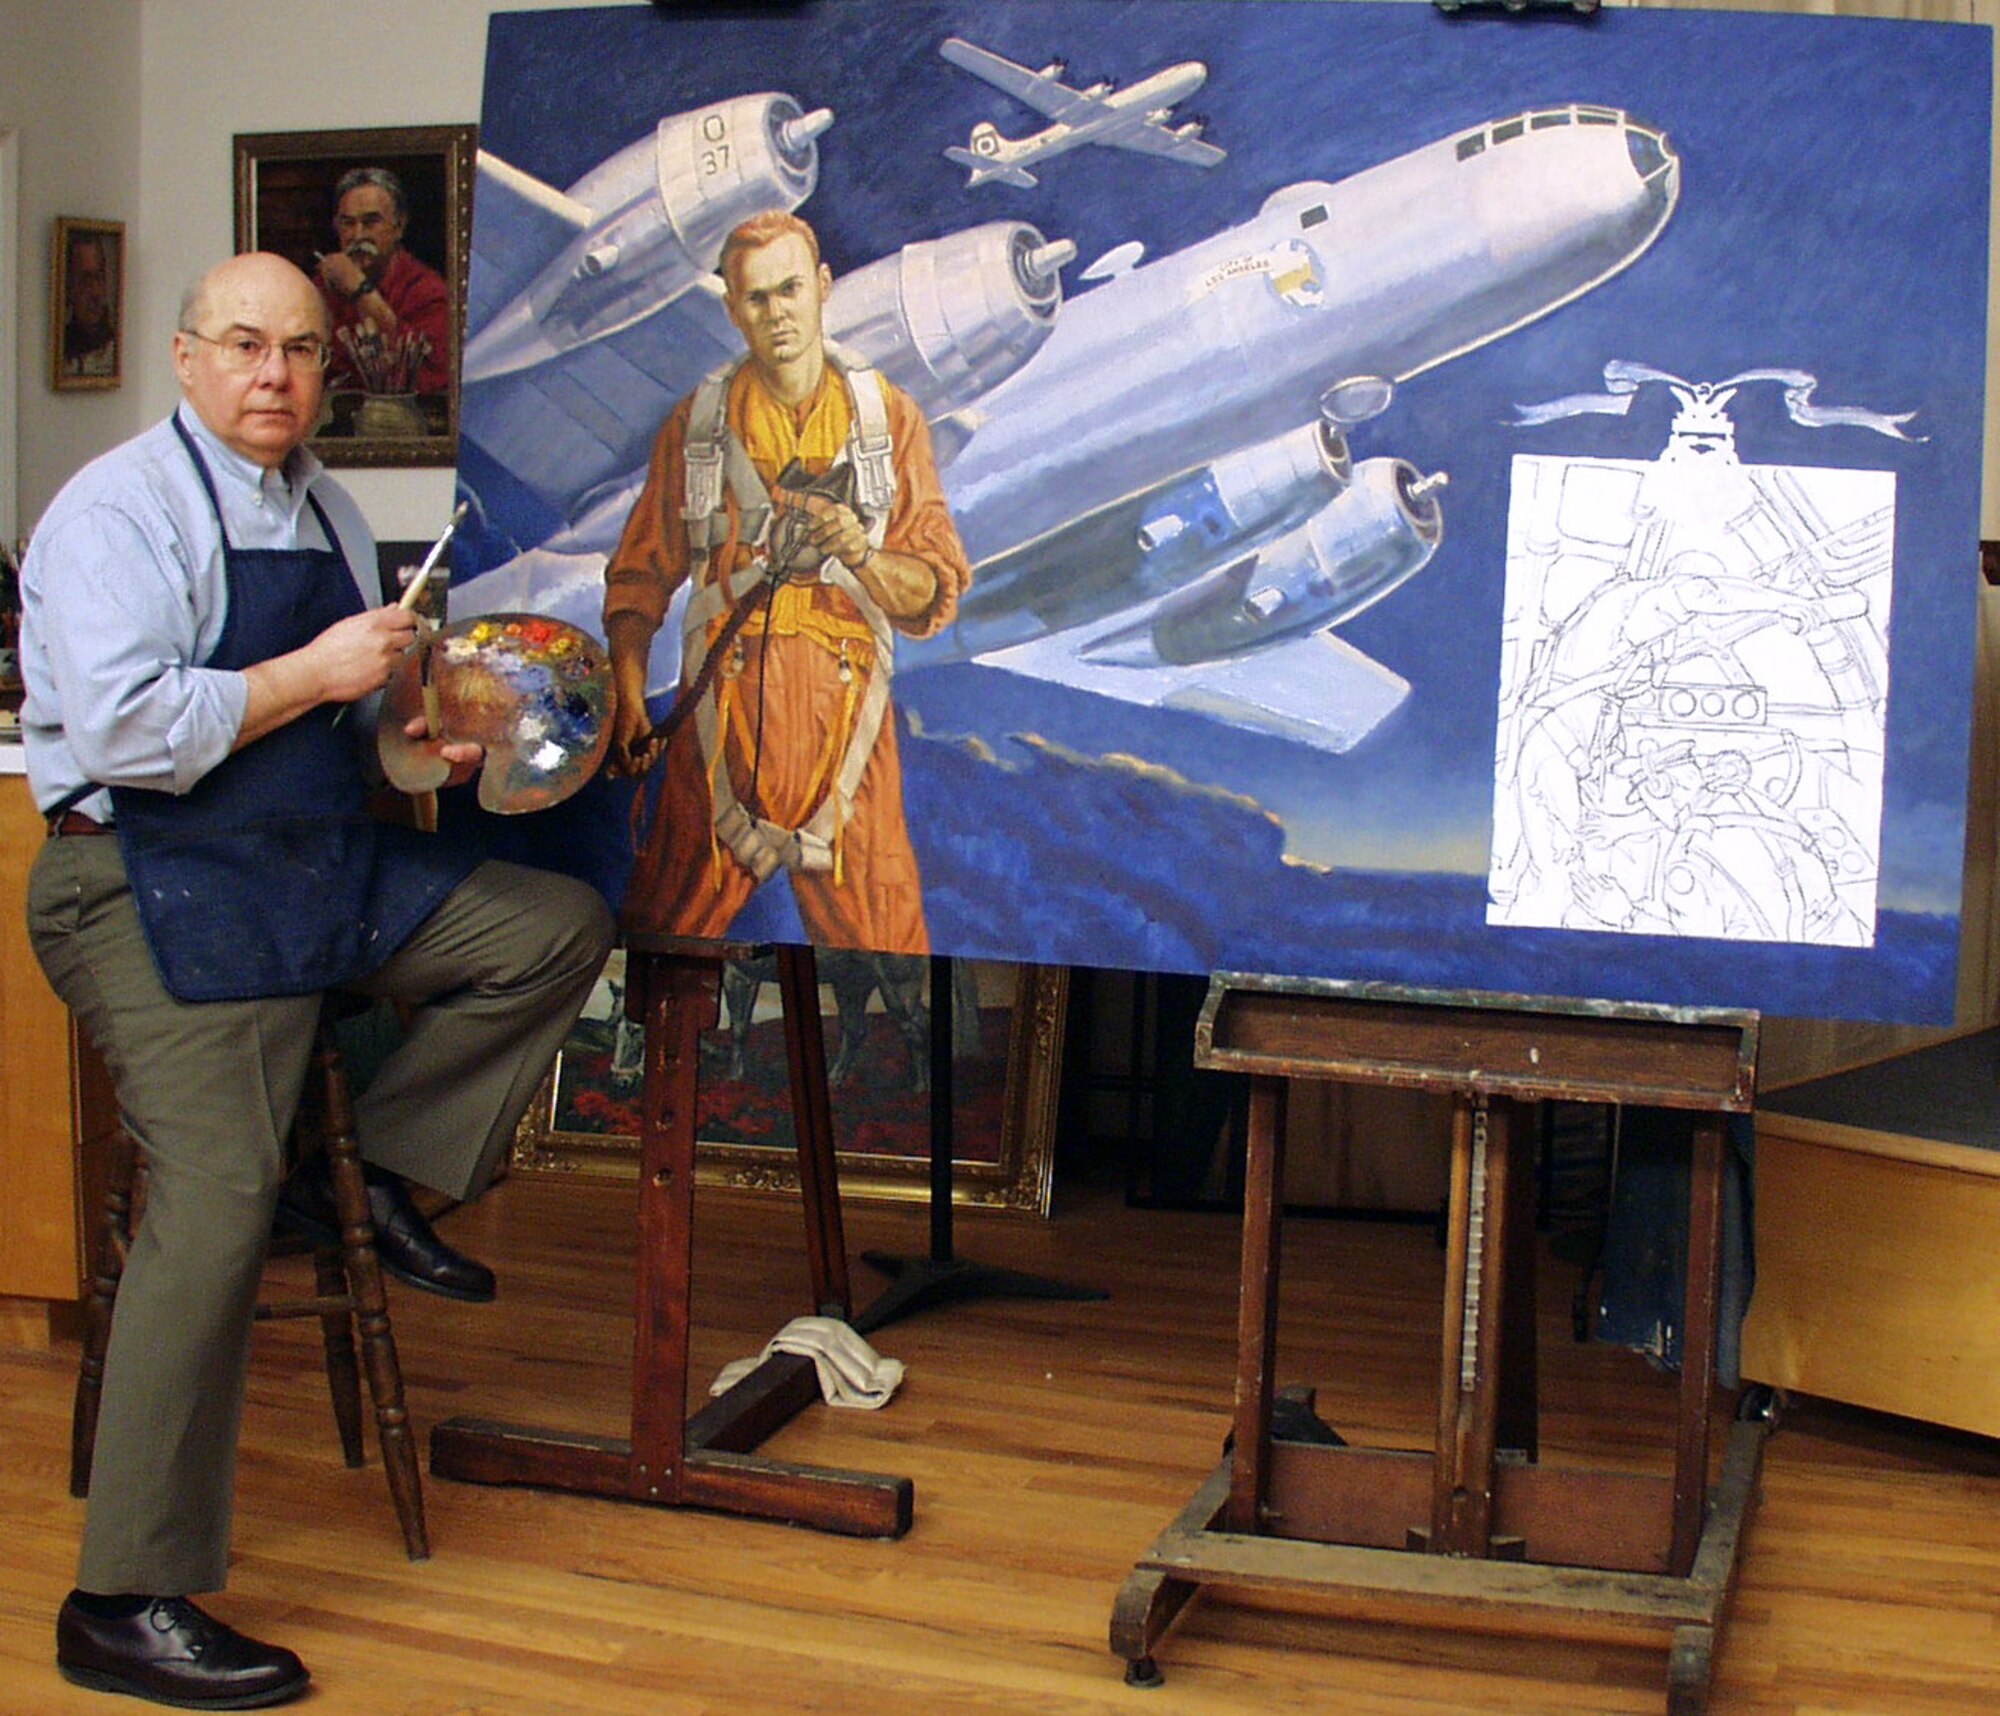 WASHINGTON -- Artist John Witt works on a painting featuring Staff Sgt. Henry "Red" Erwin, a World War II Medal of Honor recipient. Witt has been doing work for the Air Force Art Program since the early 1980s. (Courtesy photo)